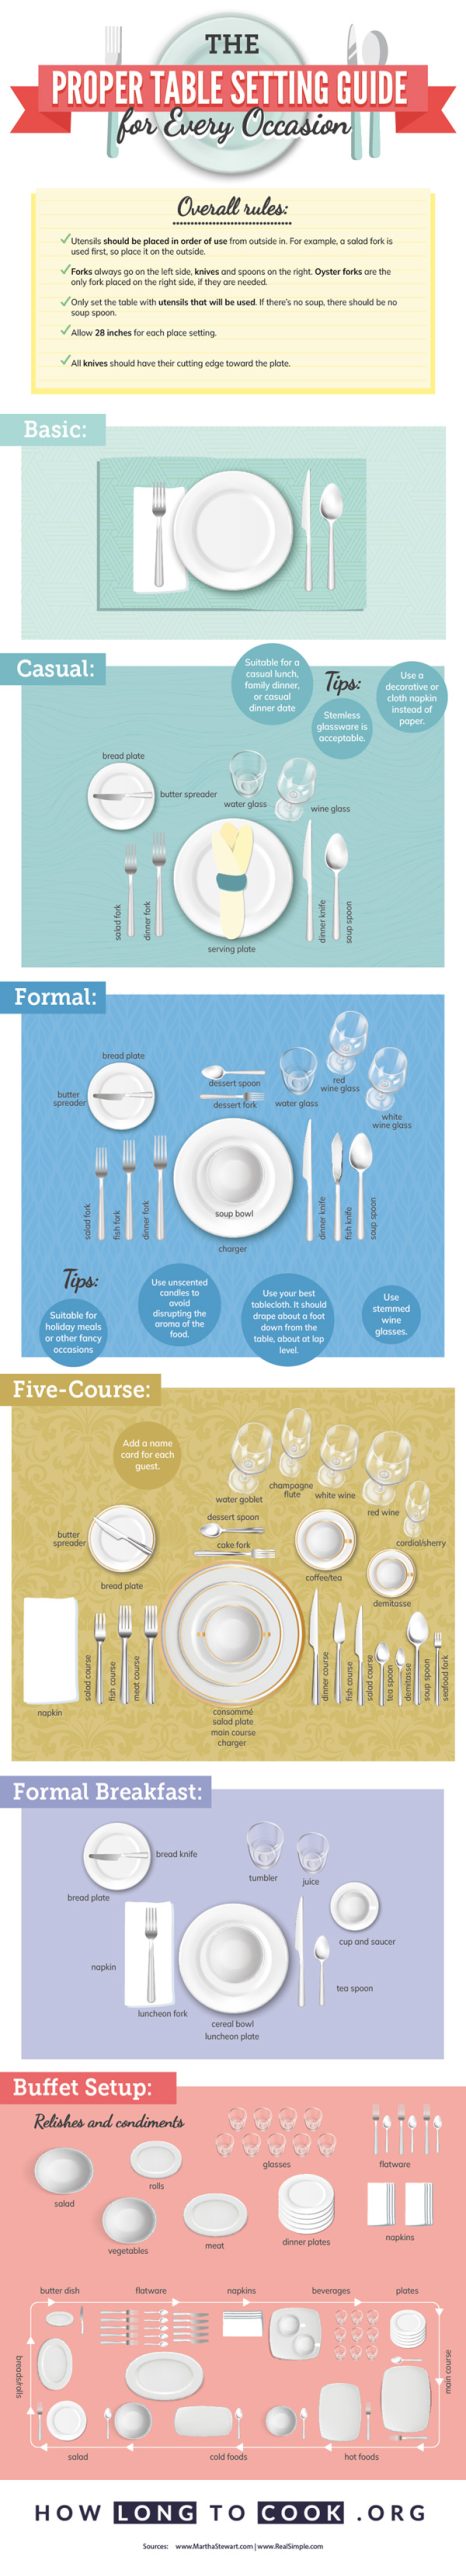 Proper Table Setting Guide [Infographic]